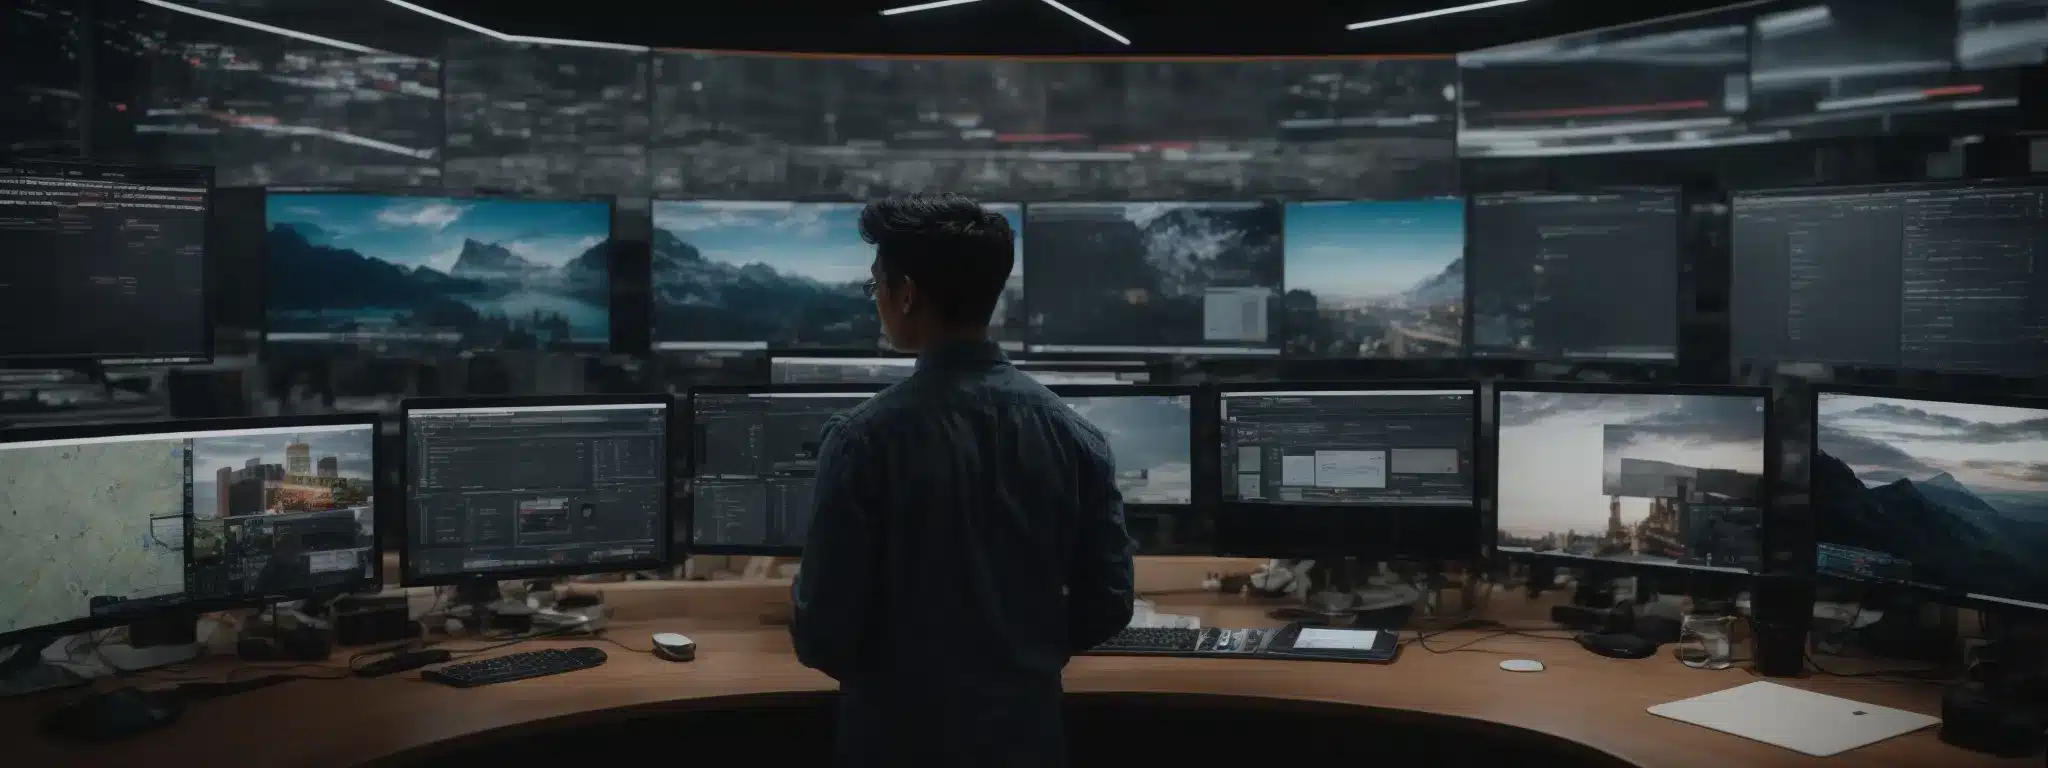 A Digital Marketer Surrounded By Large, Screen-Filled Command Center Orchestrating A Campaign Across Multiple Social Media Platforms.